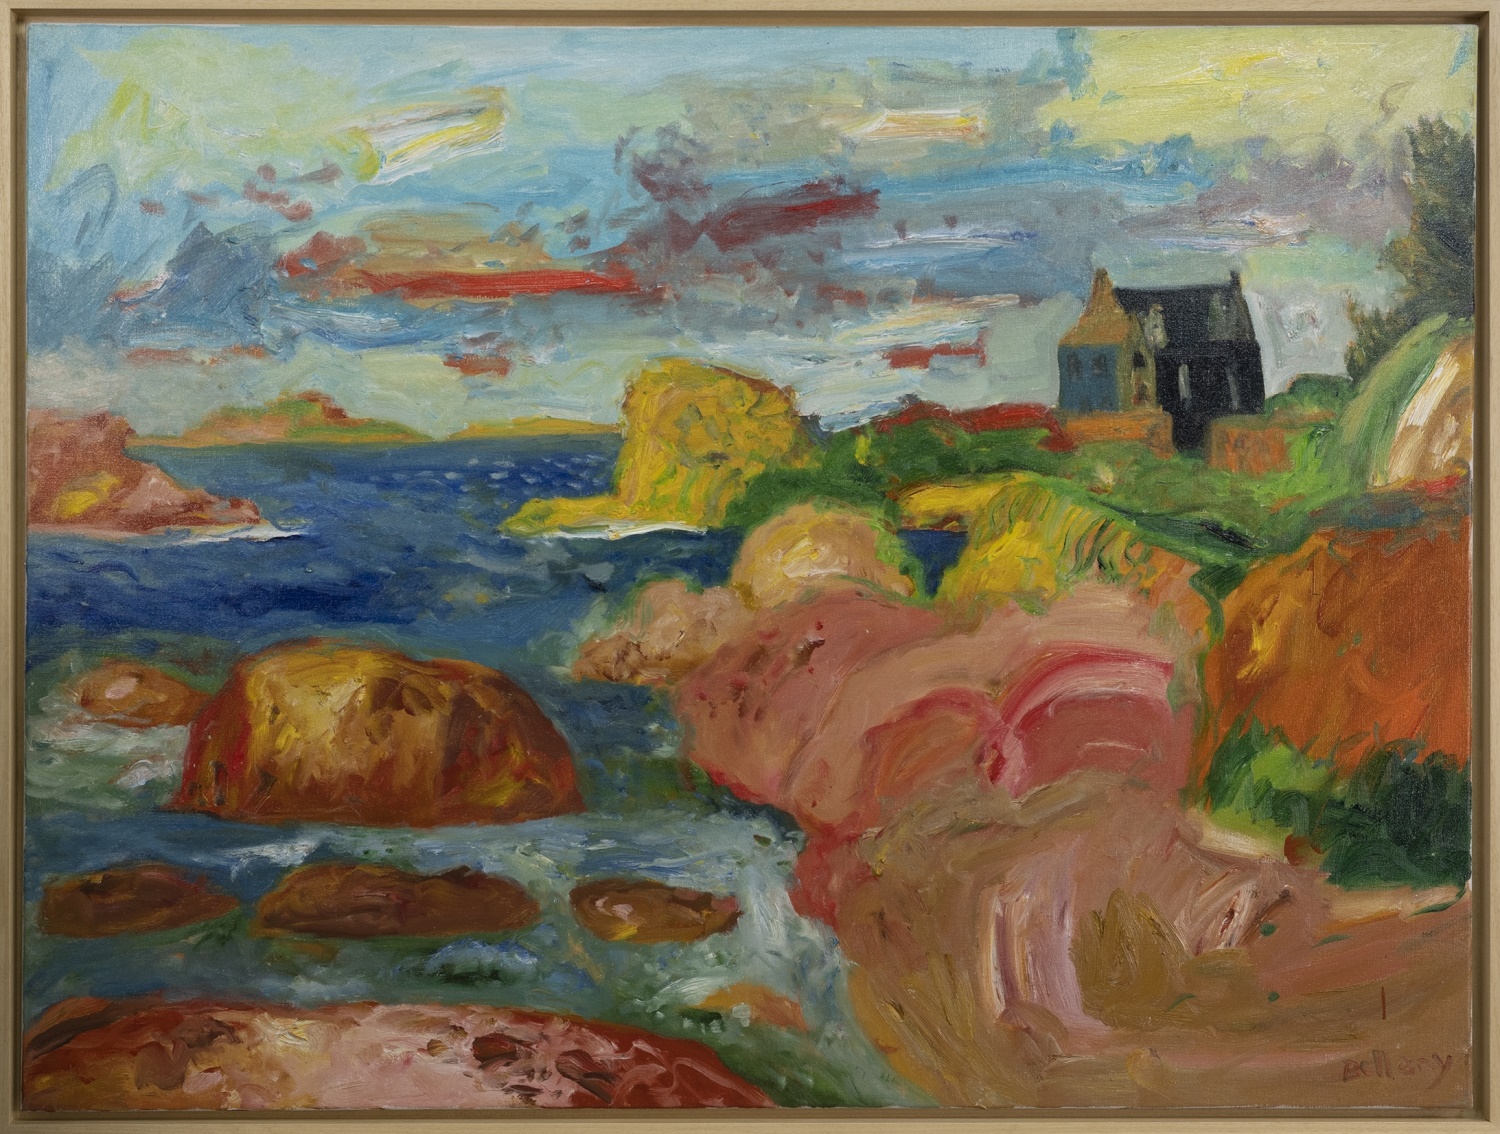 BLACK HOUSE ON THE WESTERN ISLE, AN OIL BY JOHN BELLANY